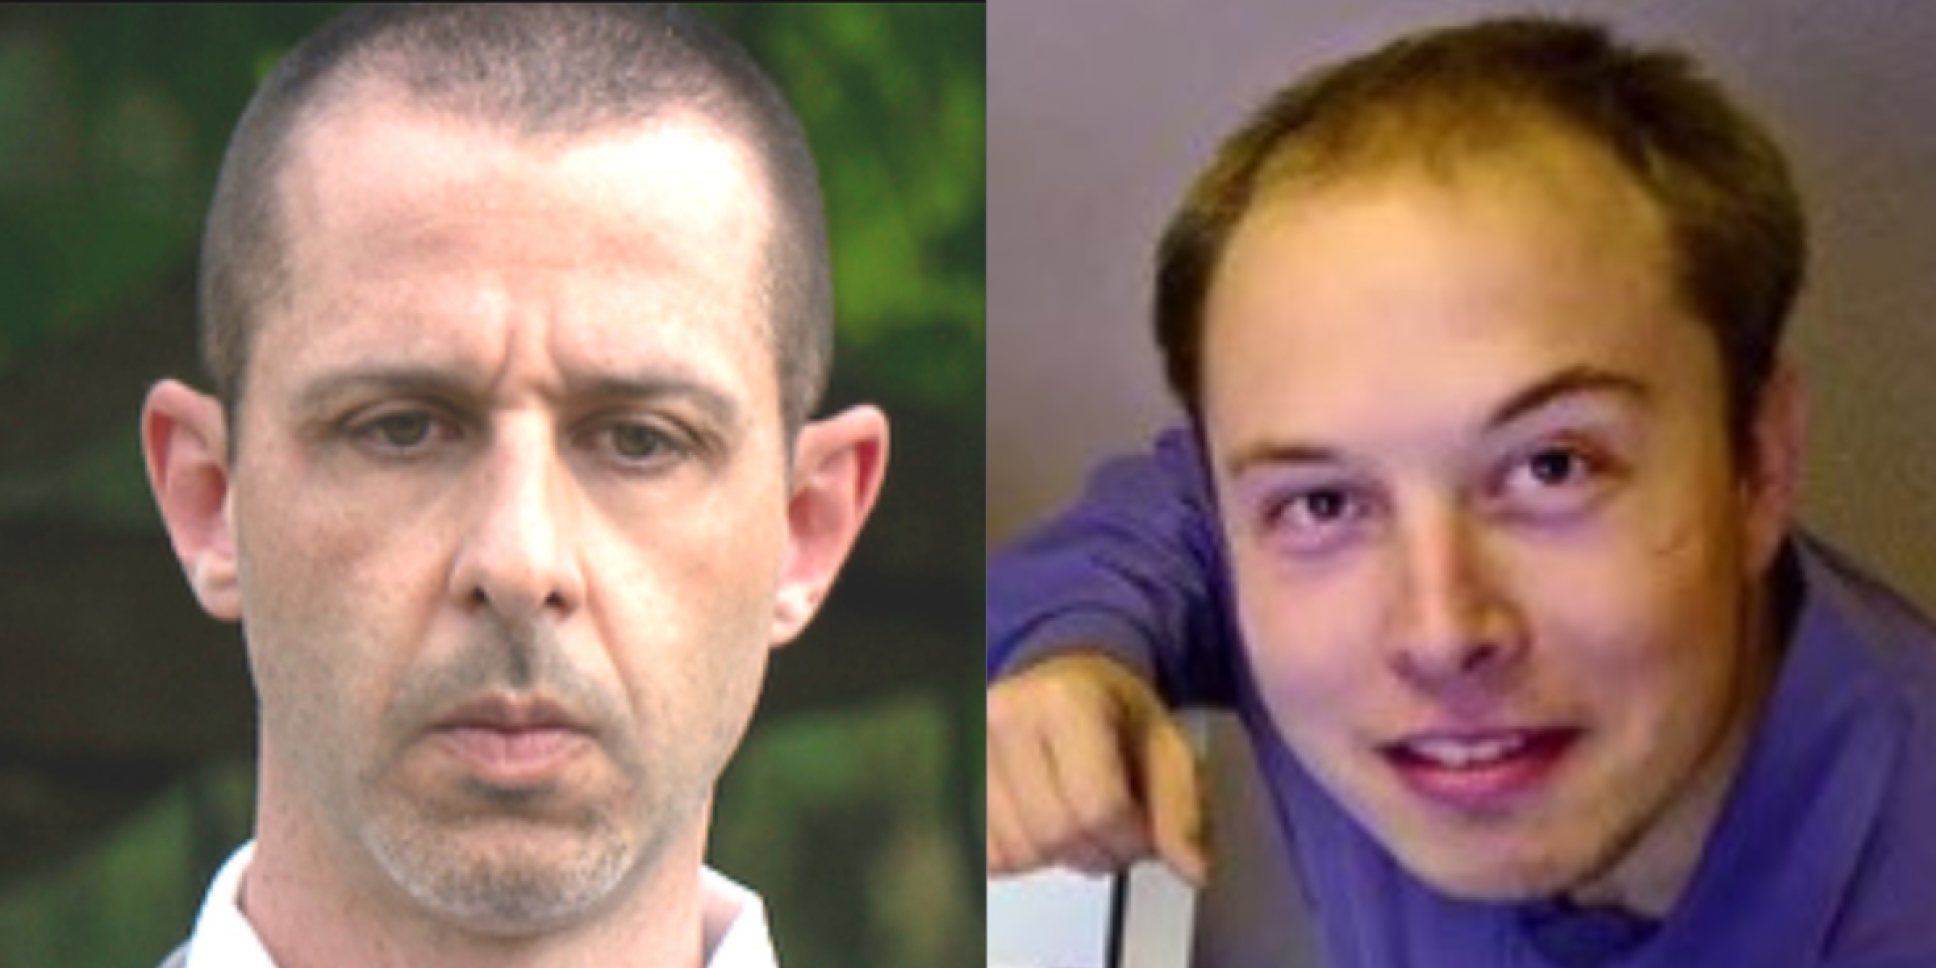 Left: Kendall Roy with a shaved head. Right: Elon Musk before his hair transplant